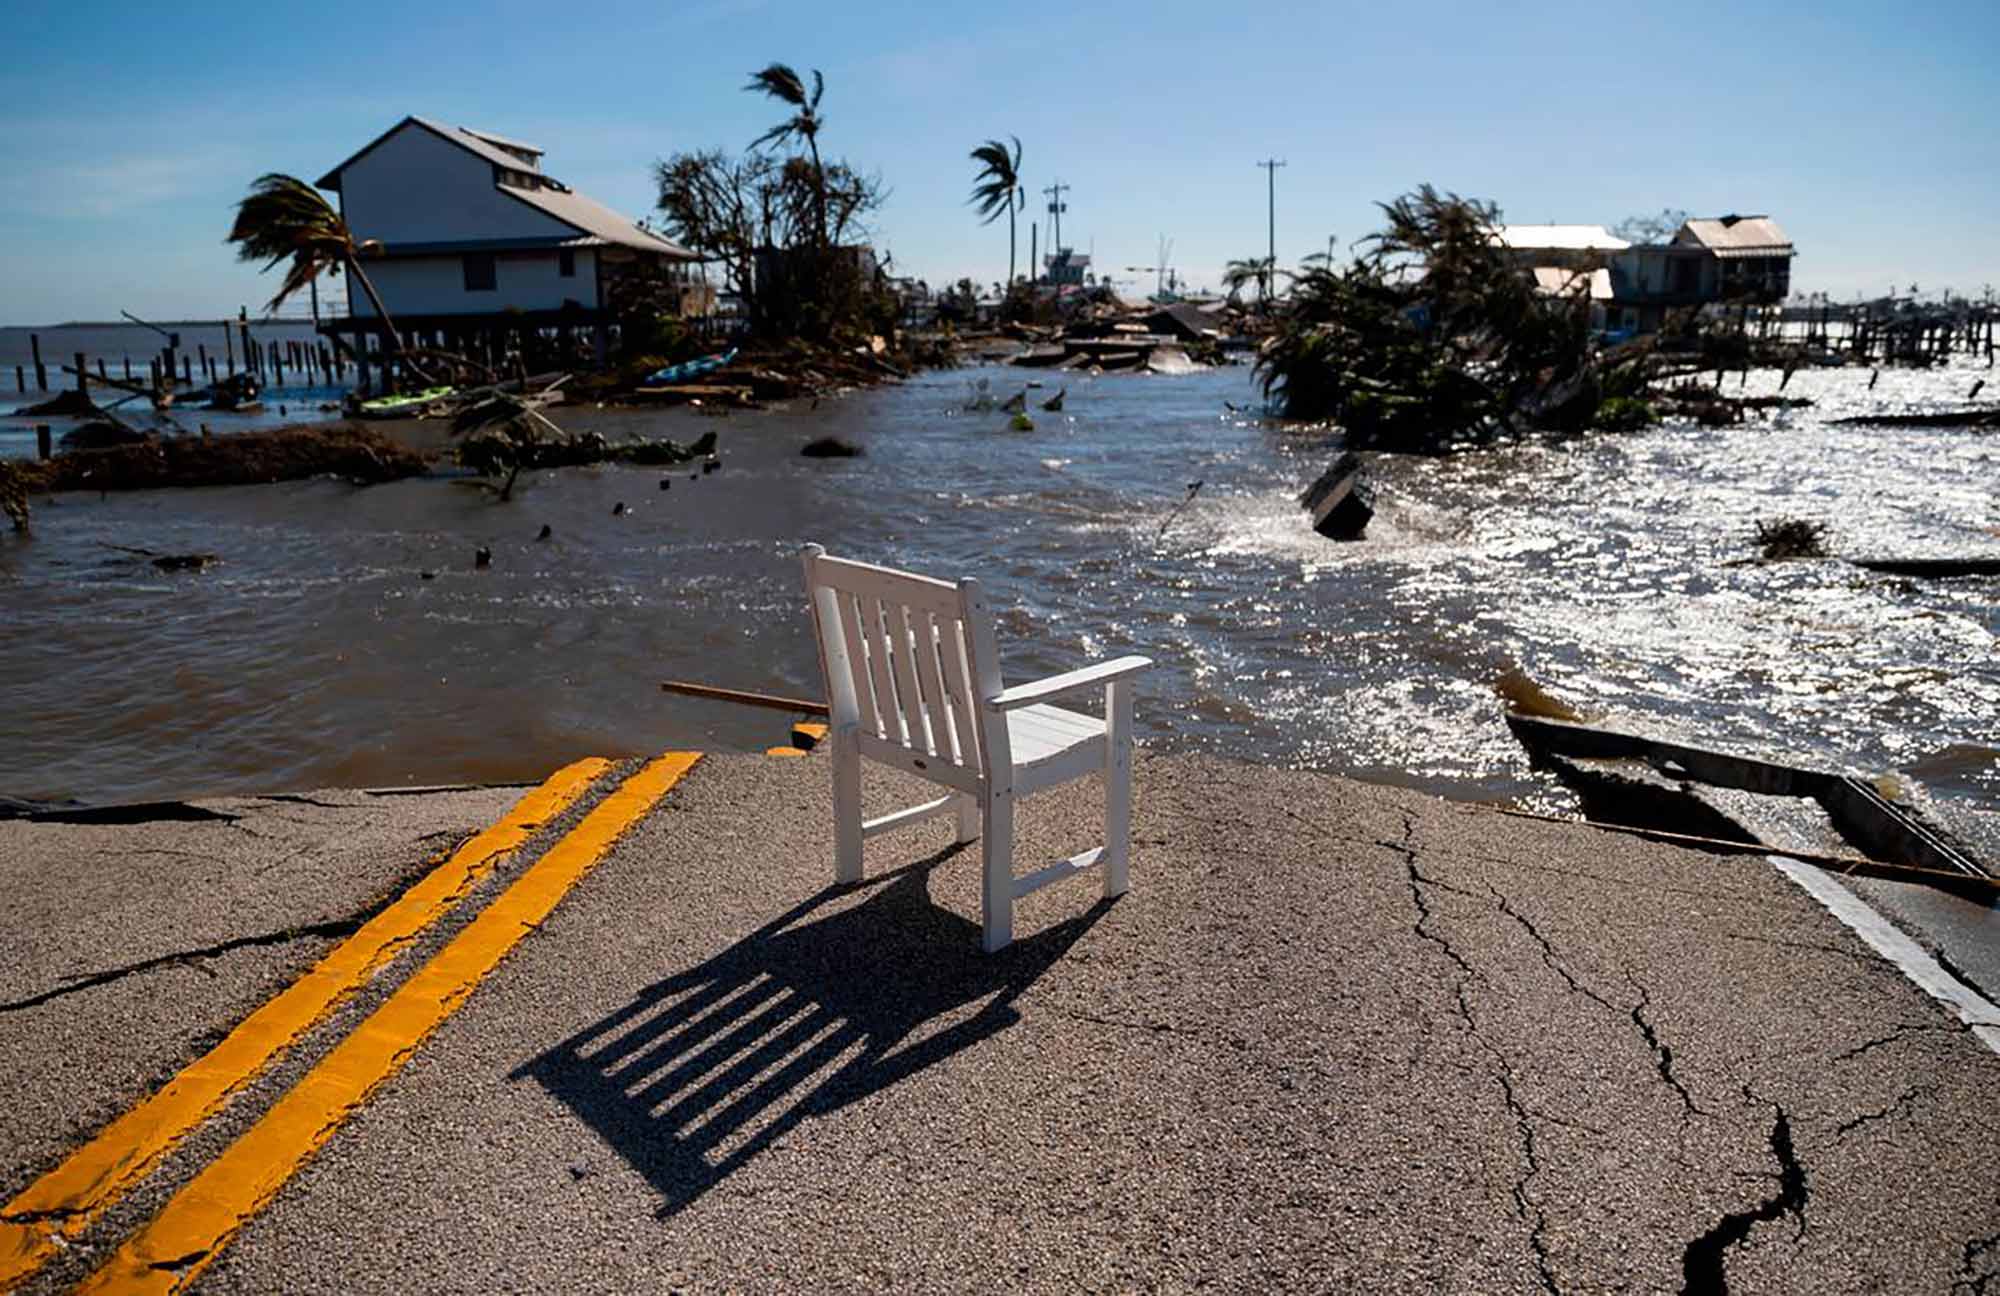 A lone lawn chair overlooks massive flooding of a street ahead of it